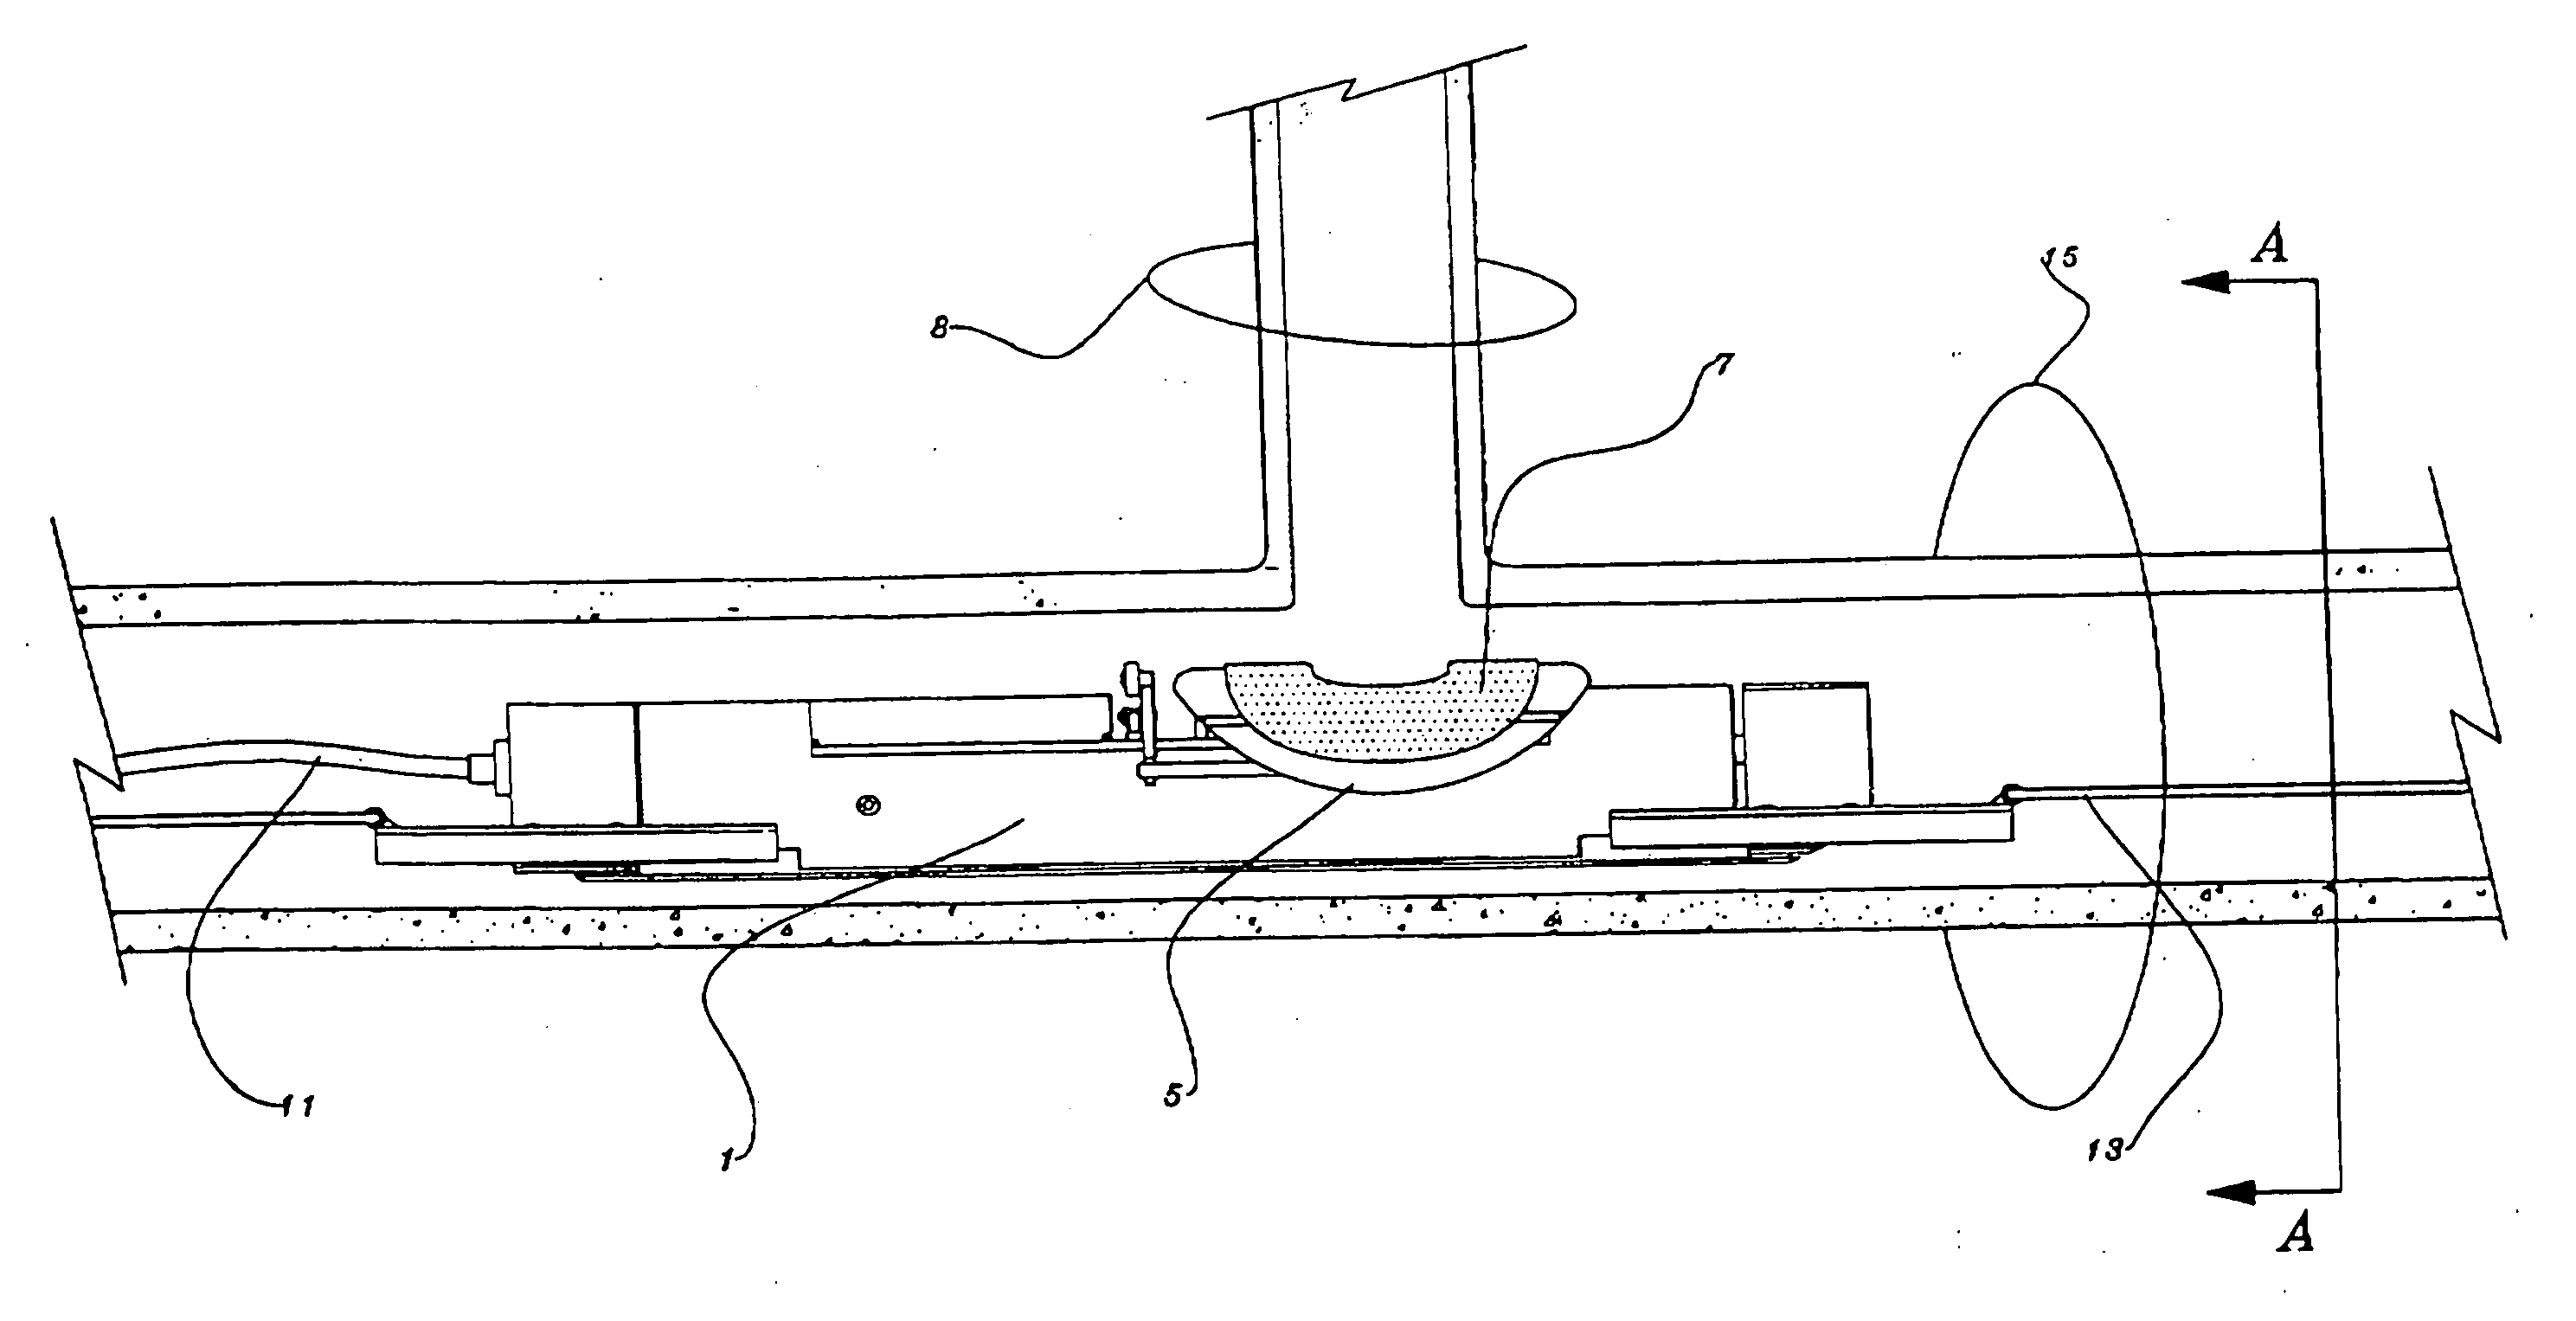 Apparatus, methods, and liners for repairing conduits